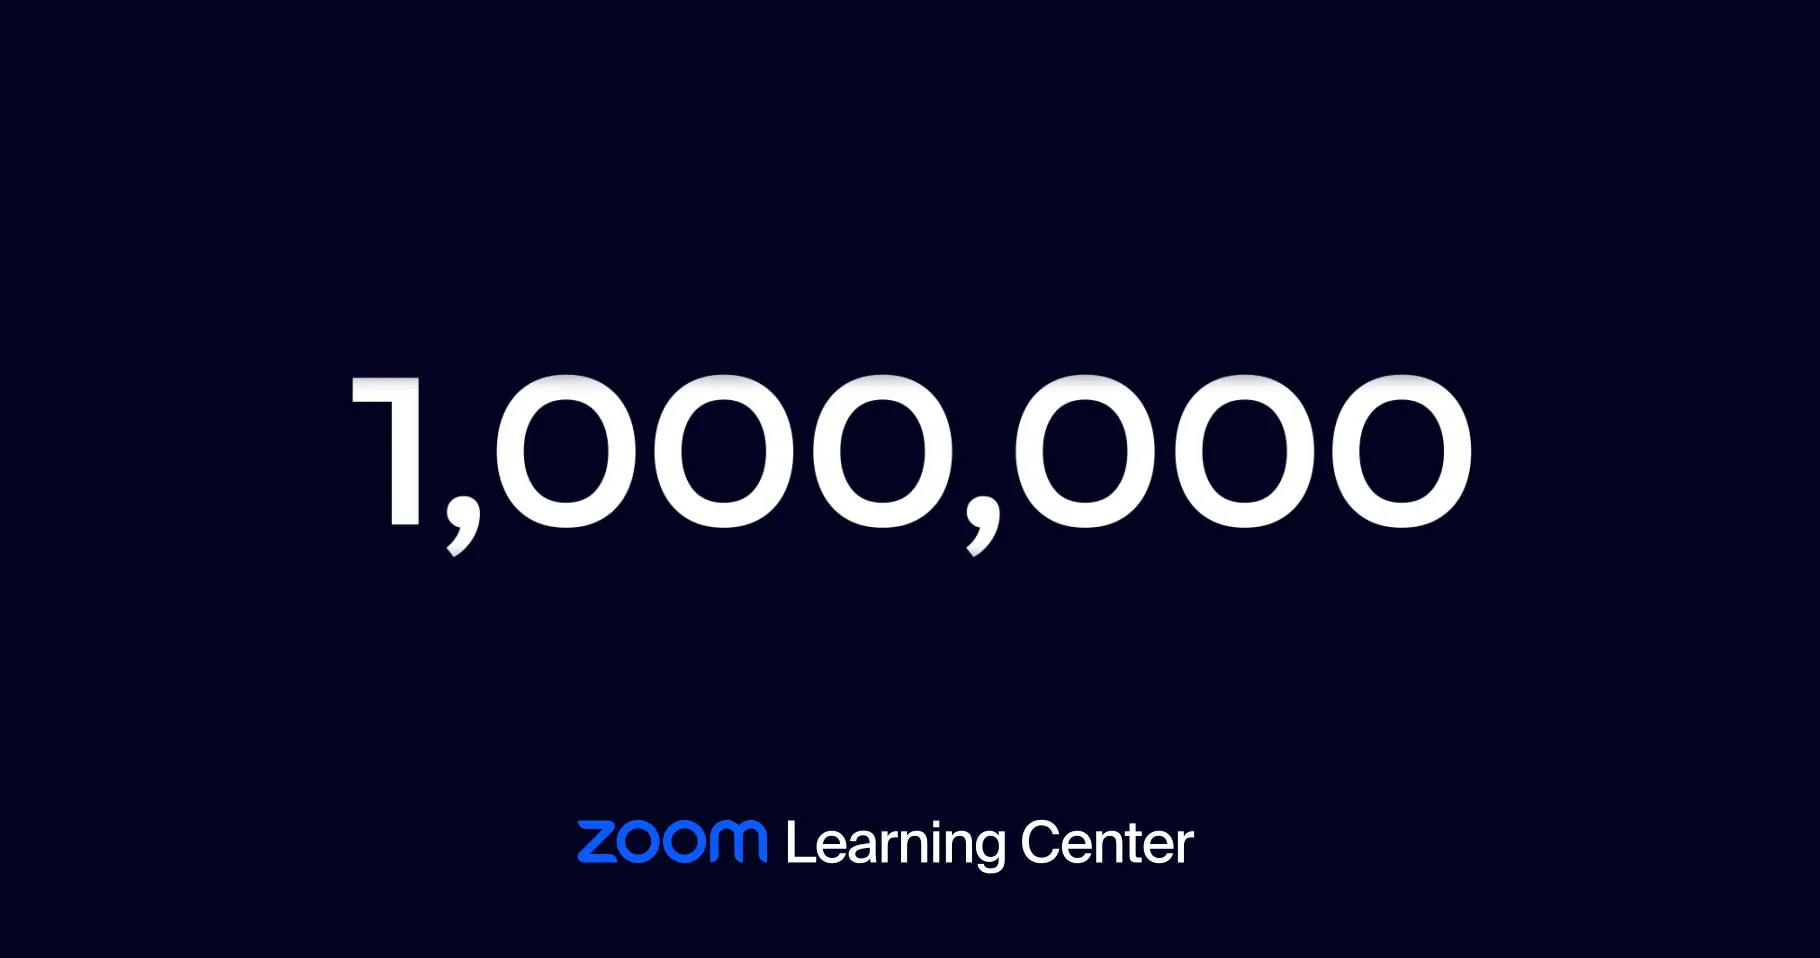 1 year, 1 million users in the Zoom Learning Center